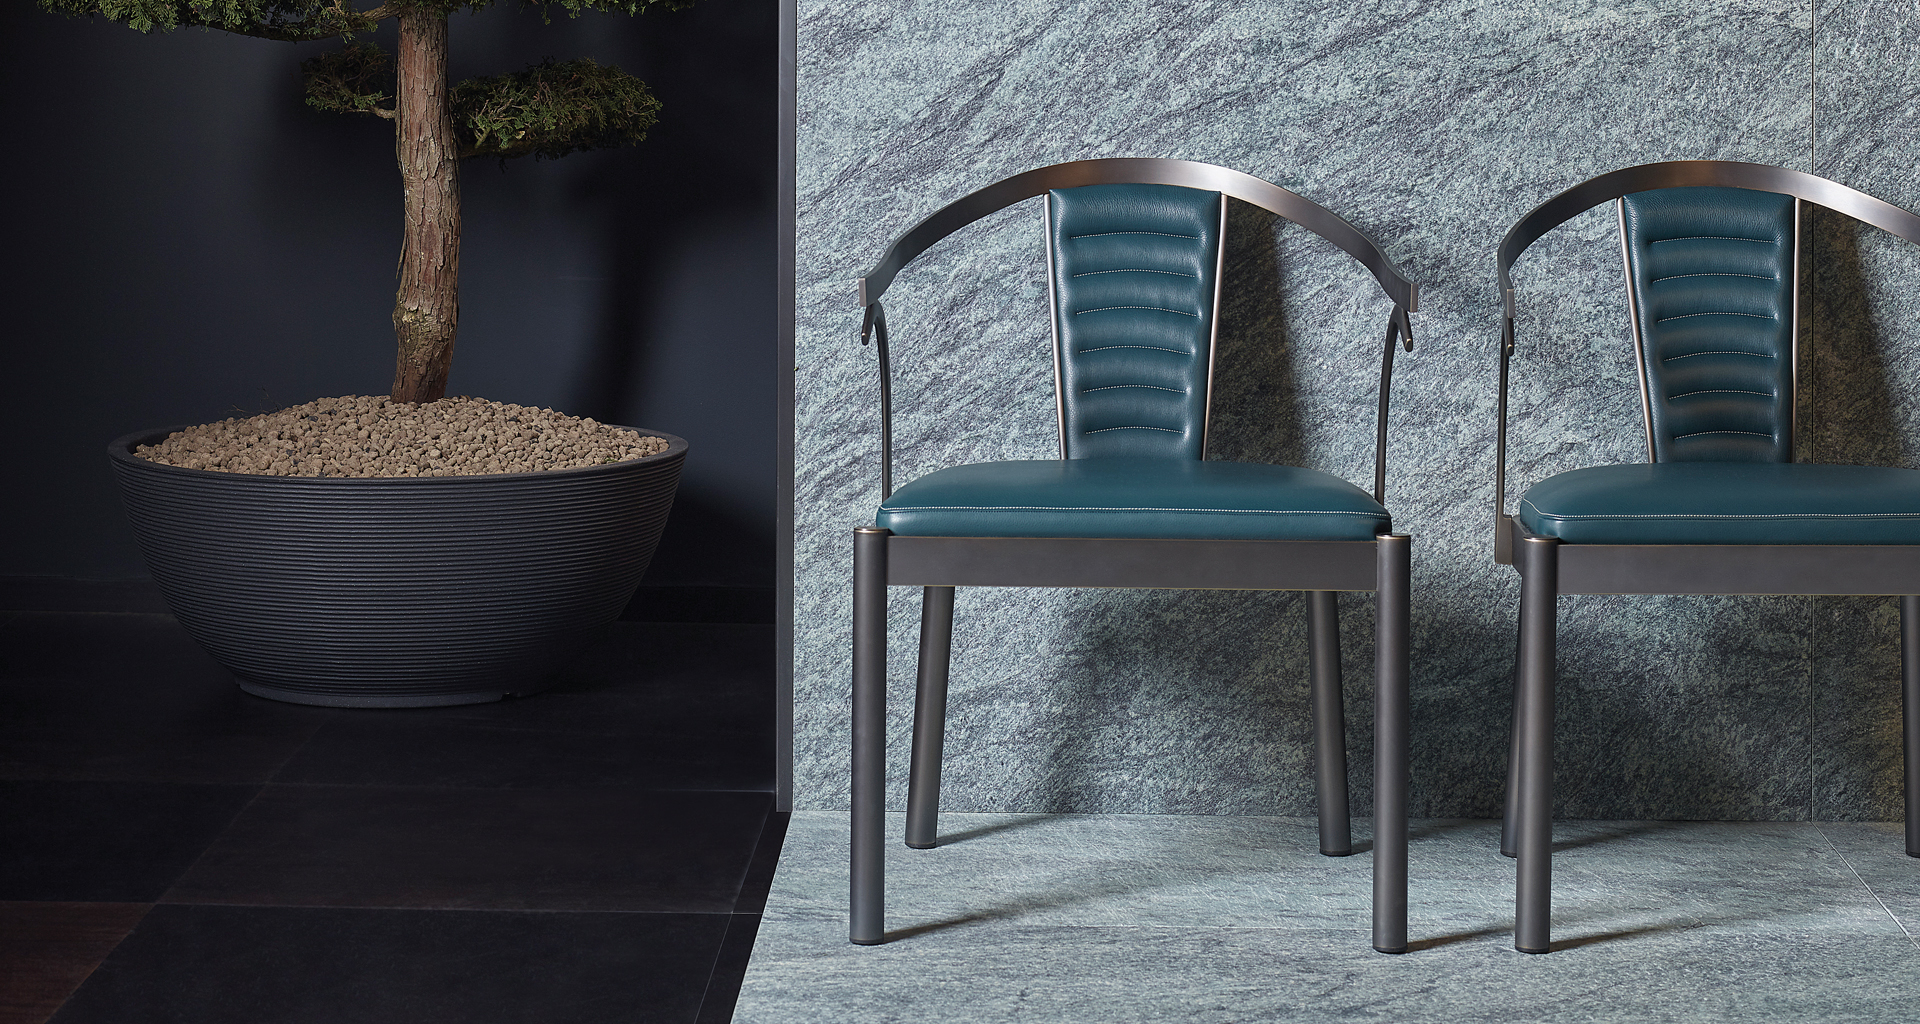 Detail of Jasmine, a bronze dining chair with armrests covered in leather, from Promemoria's catalogue | Promemoria